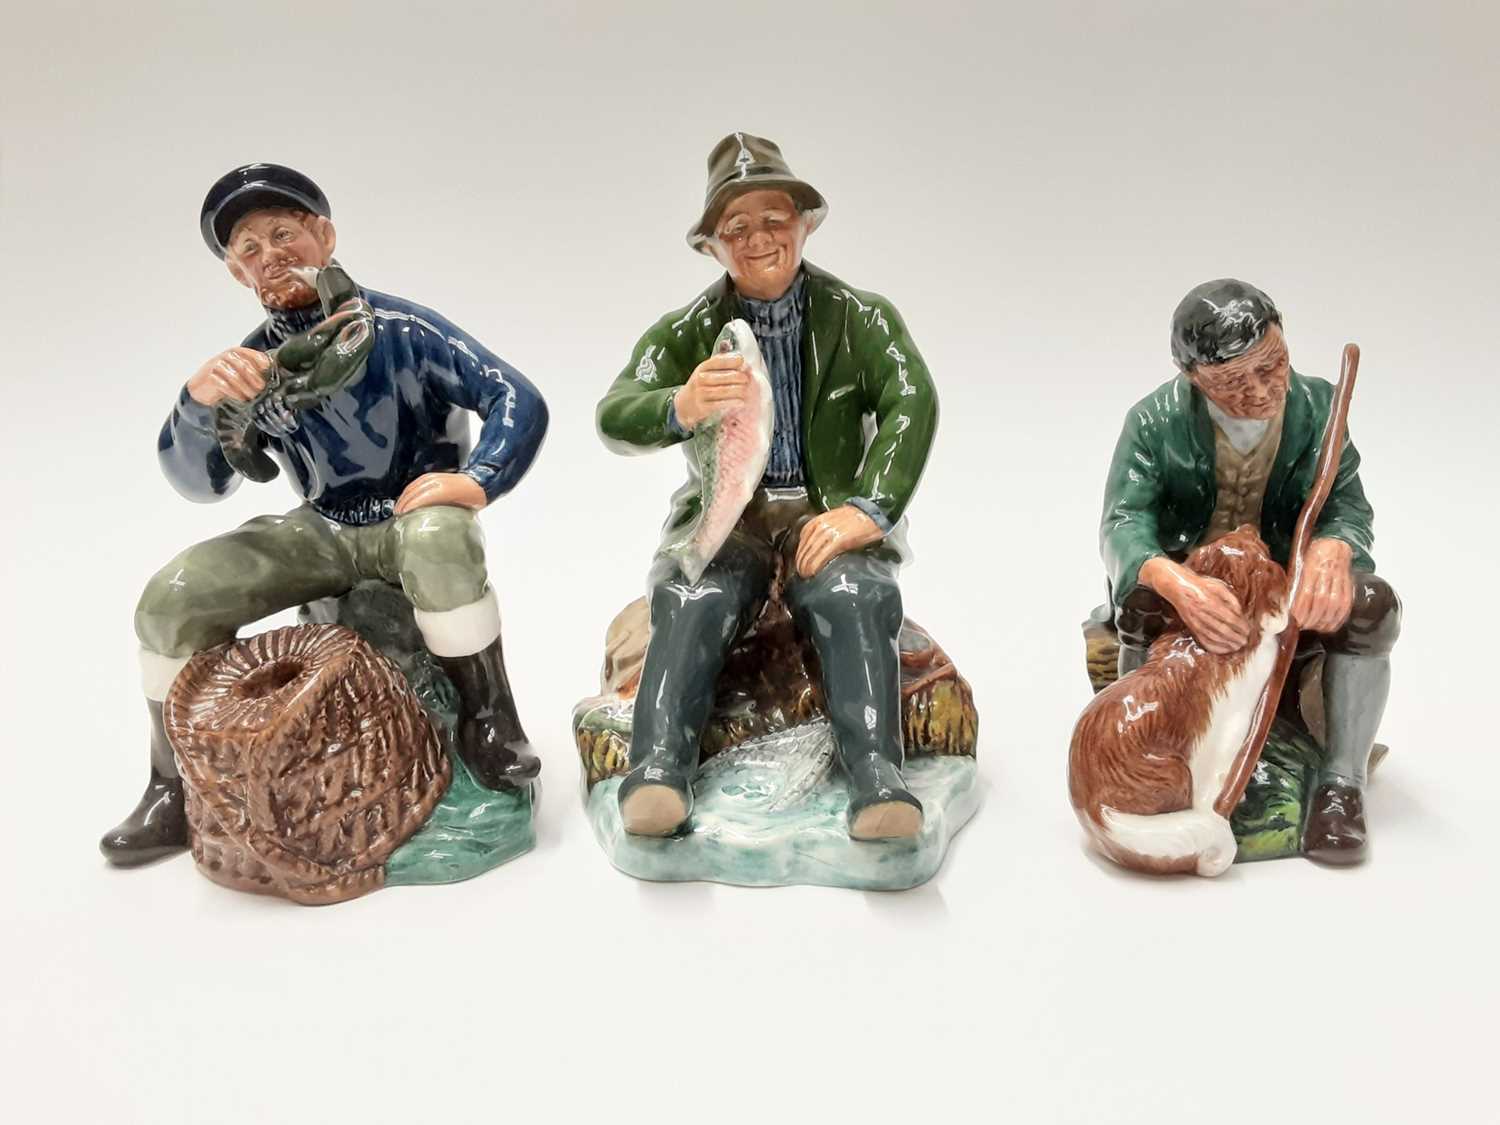 Lot 46 - Three Royal Doulton figures - A Good Catch HN2258, The Master HN2325 and The Lobster Man HN2317